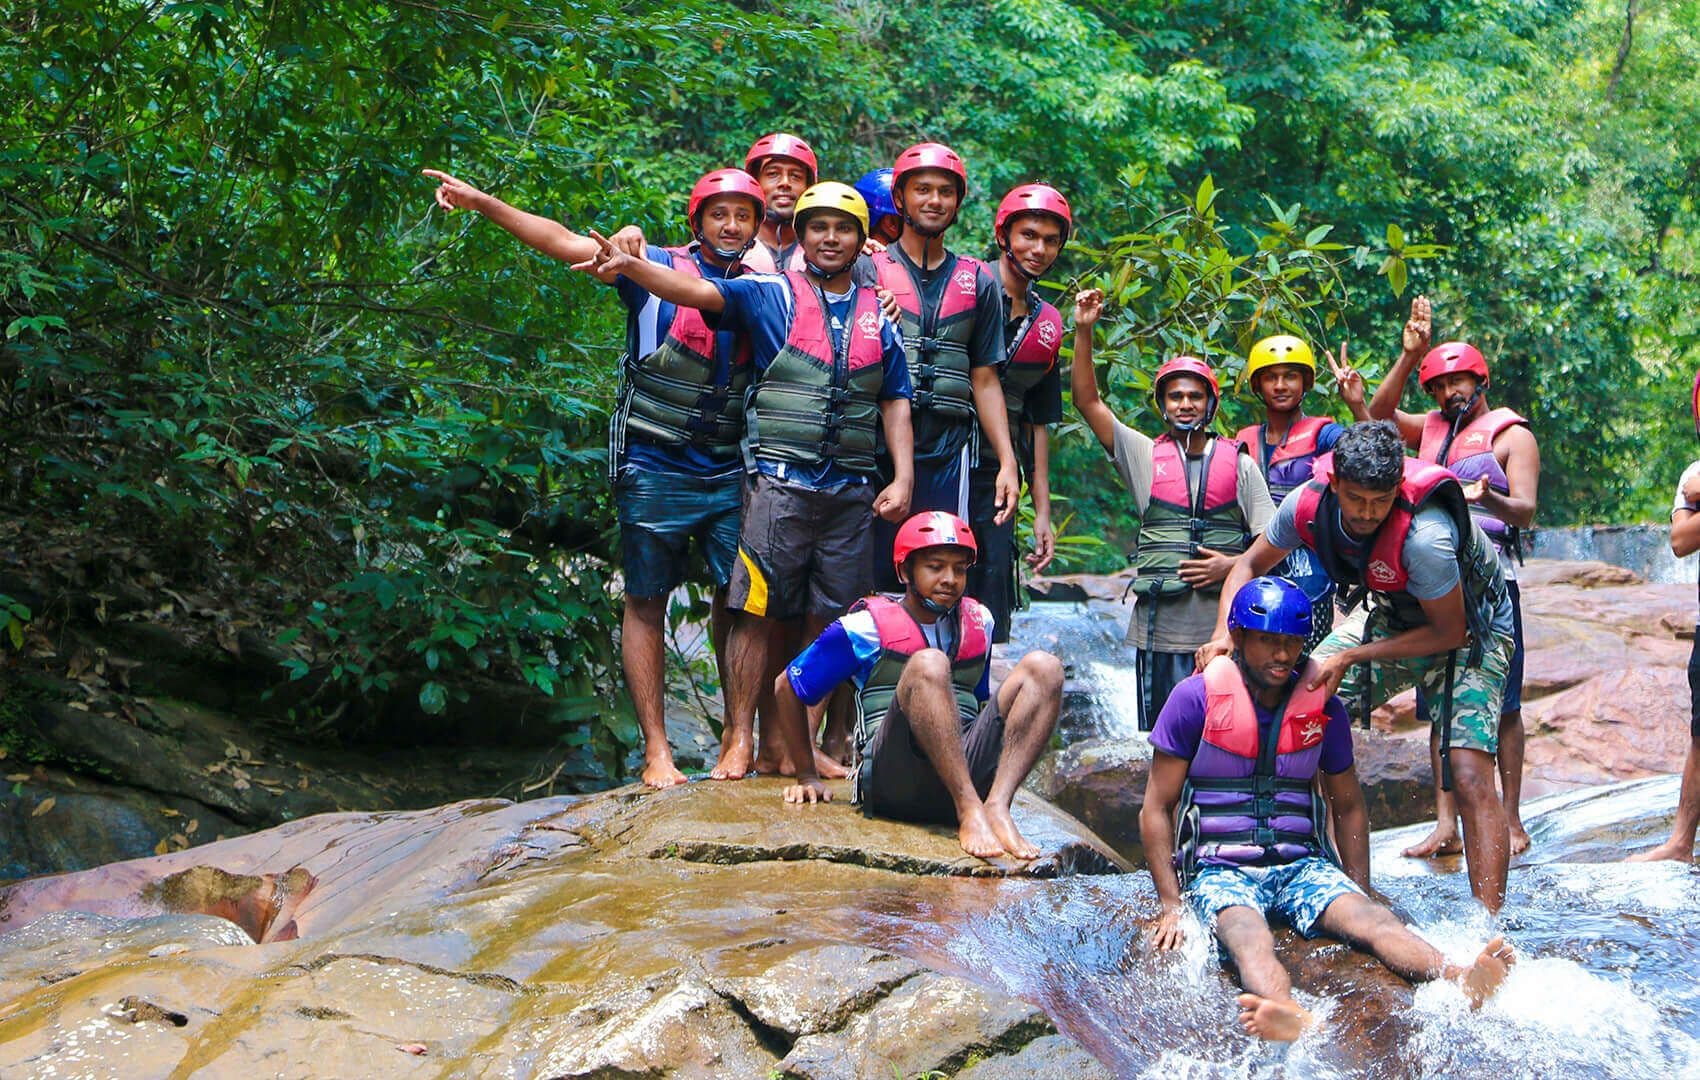 A guide give guidance to canyoning group in Kithulgala Sri Lanka